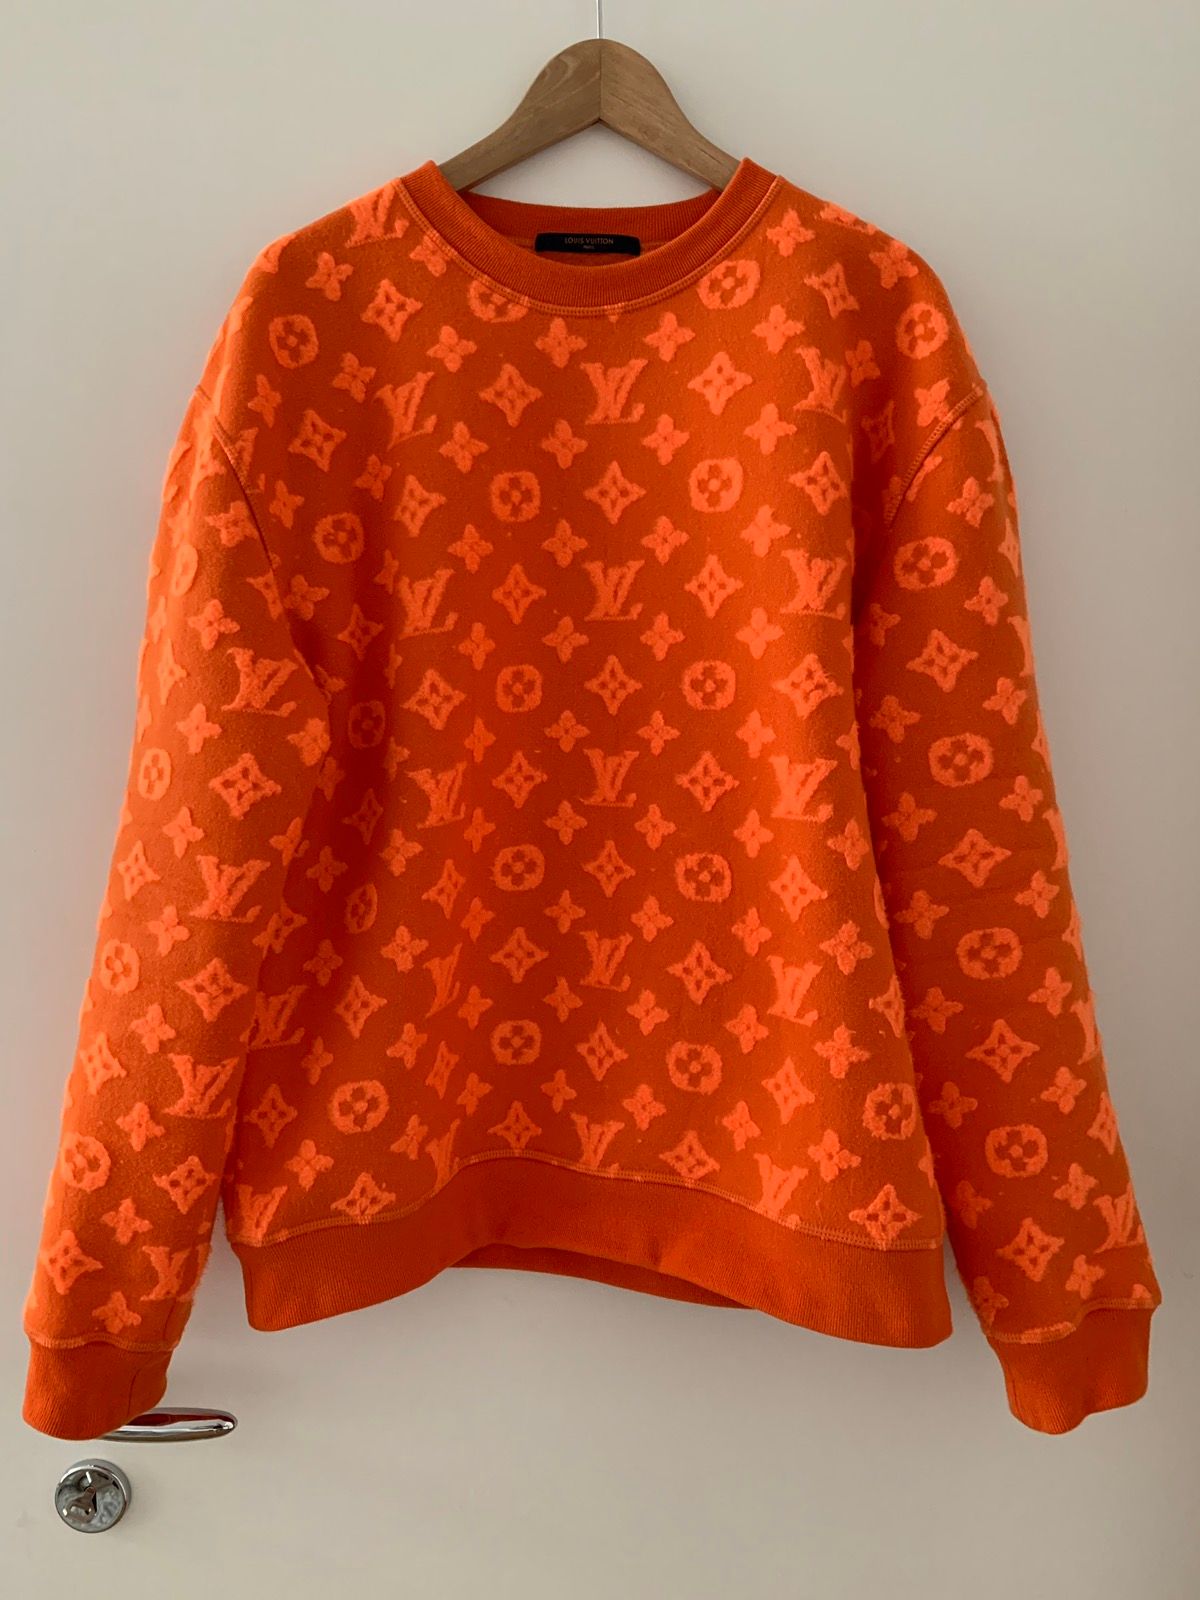 Louis Vuitton 2019 Printed Pullover - Orange Sweaters, Clothing